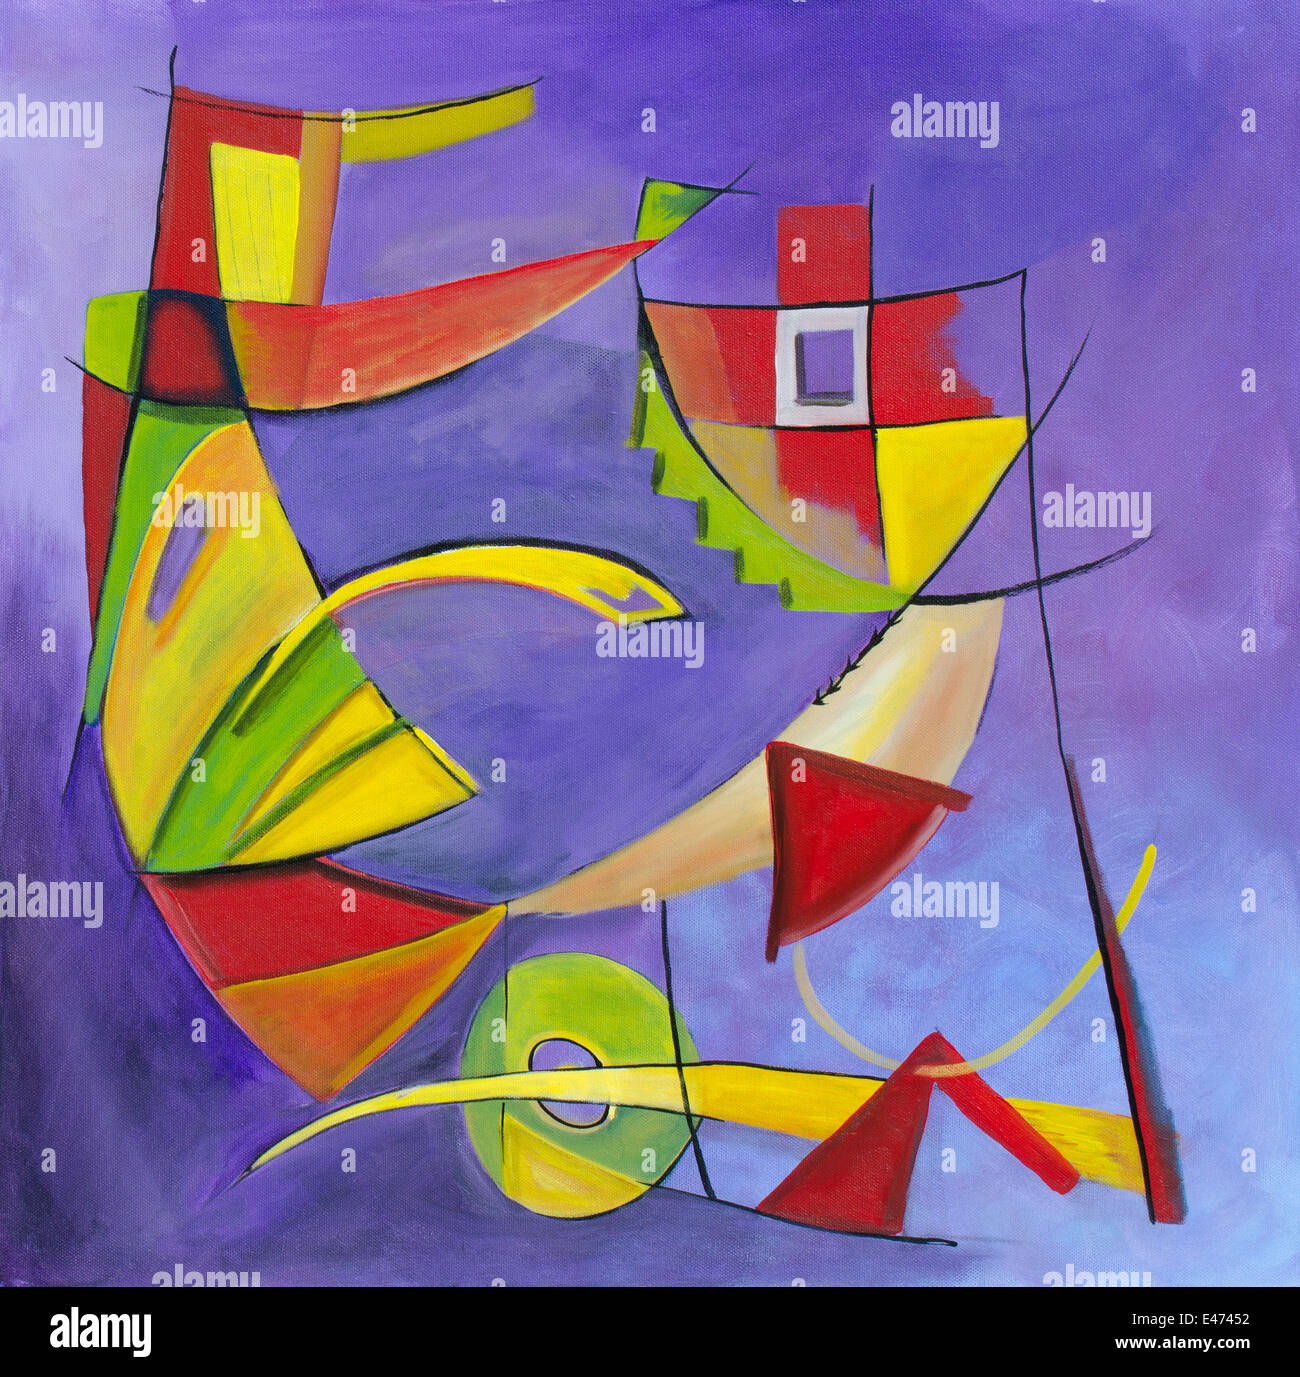 Abstract art, contemporary geometric painting. Geminal - acrylic on canvas Stock Photo